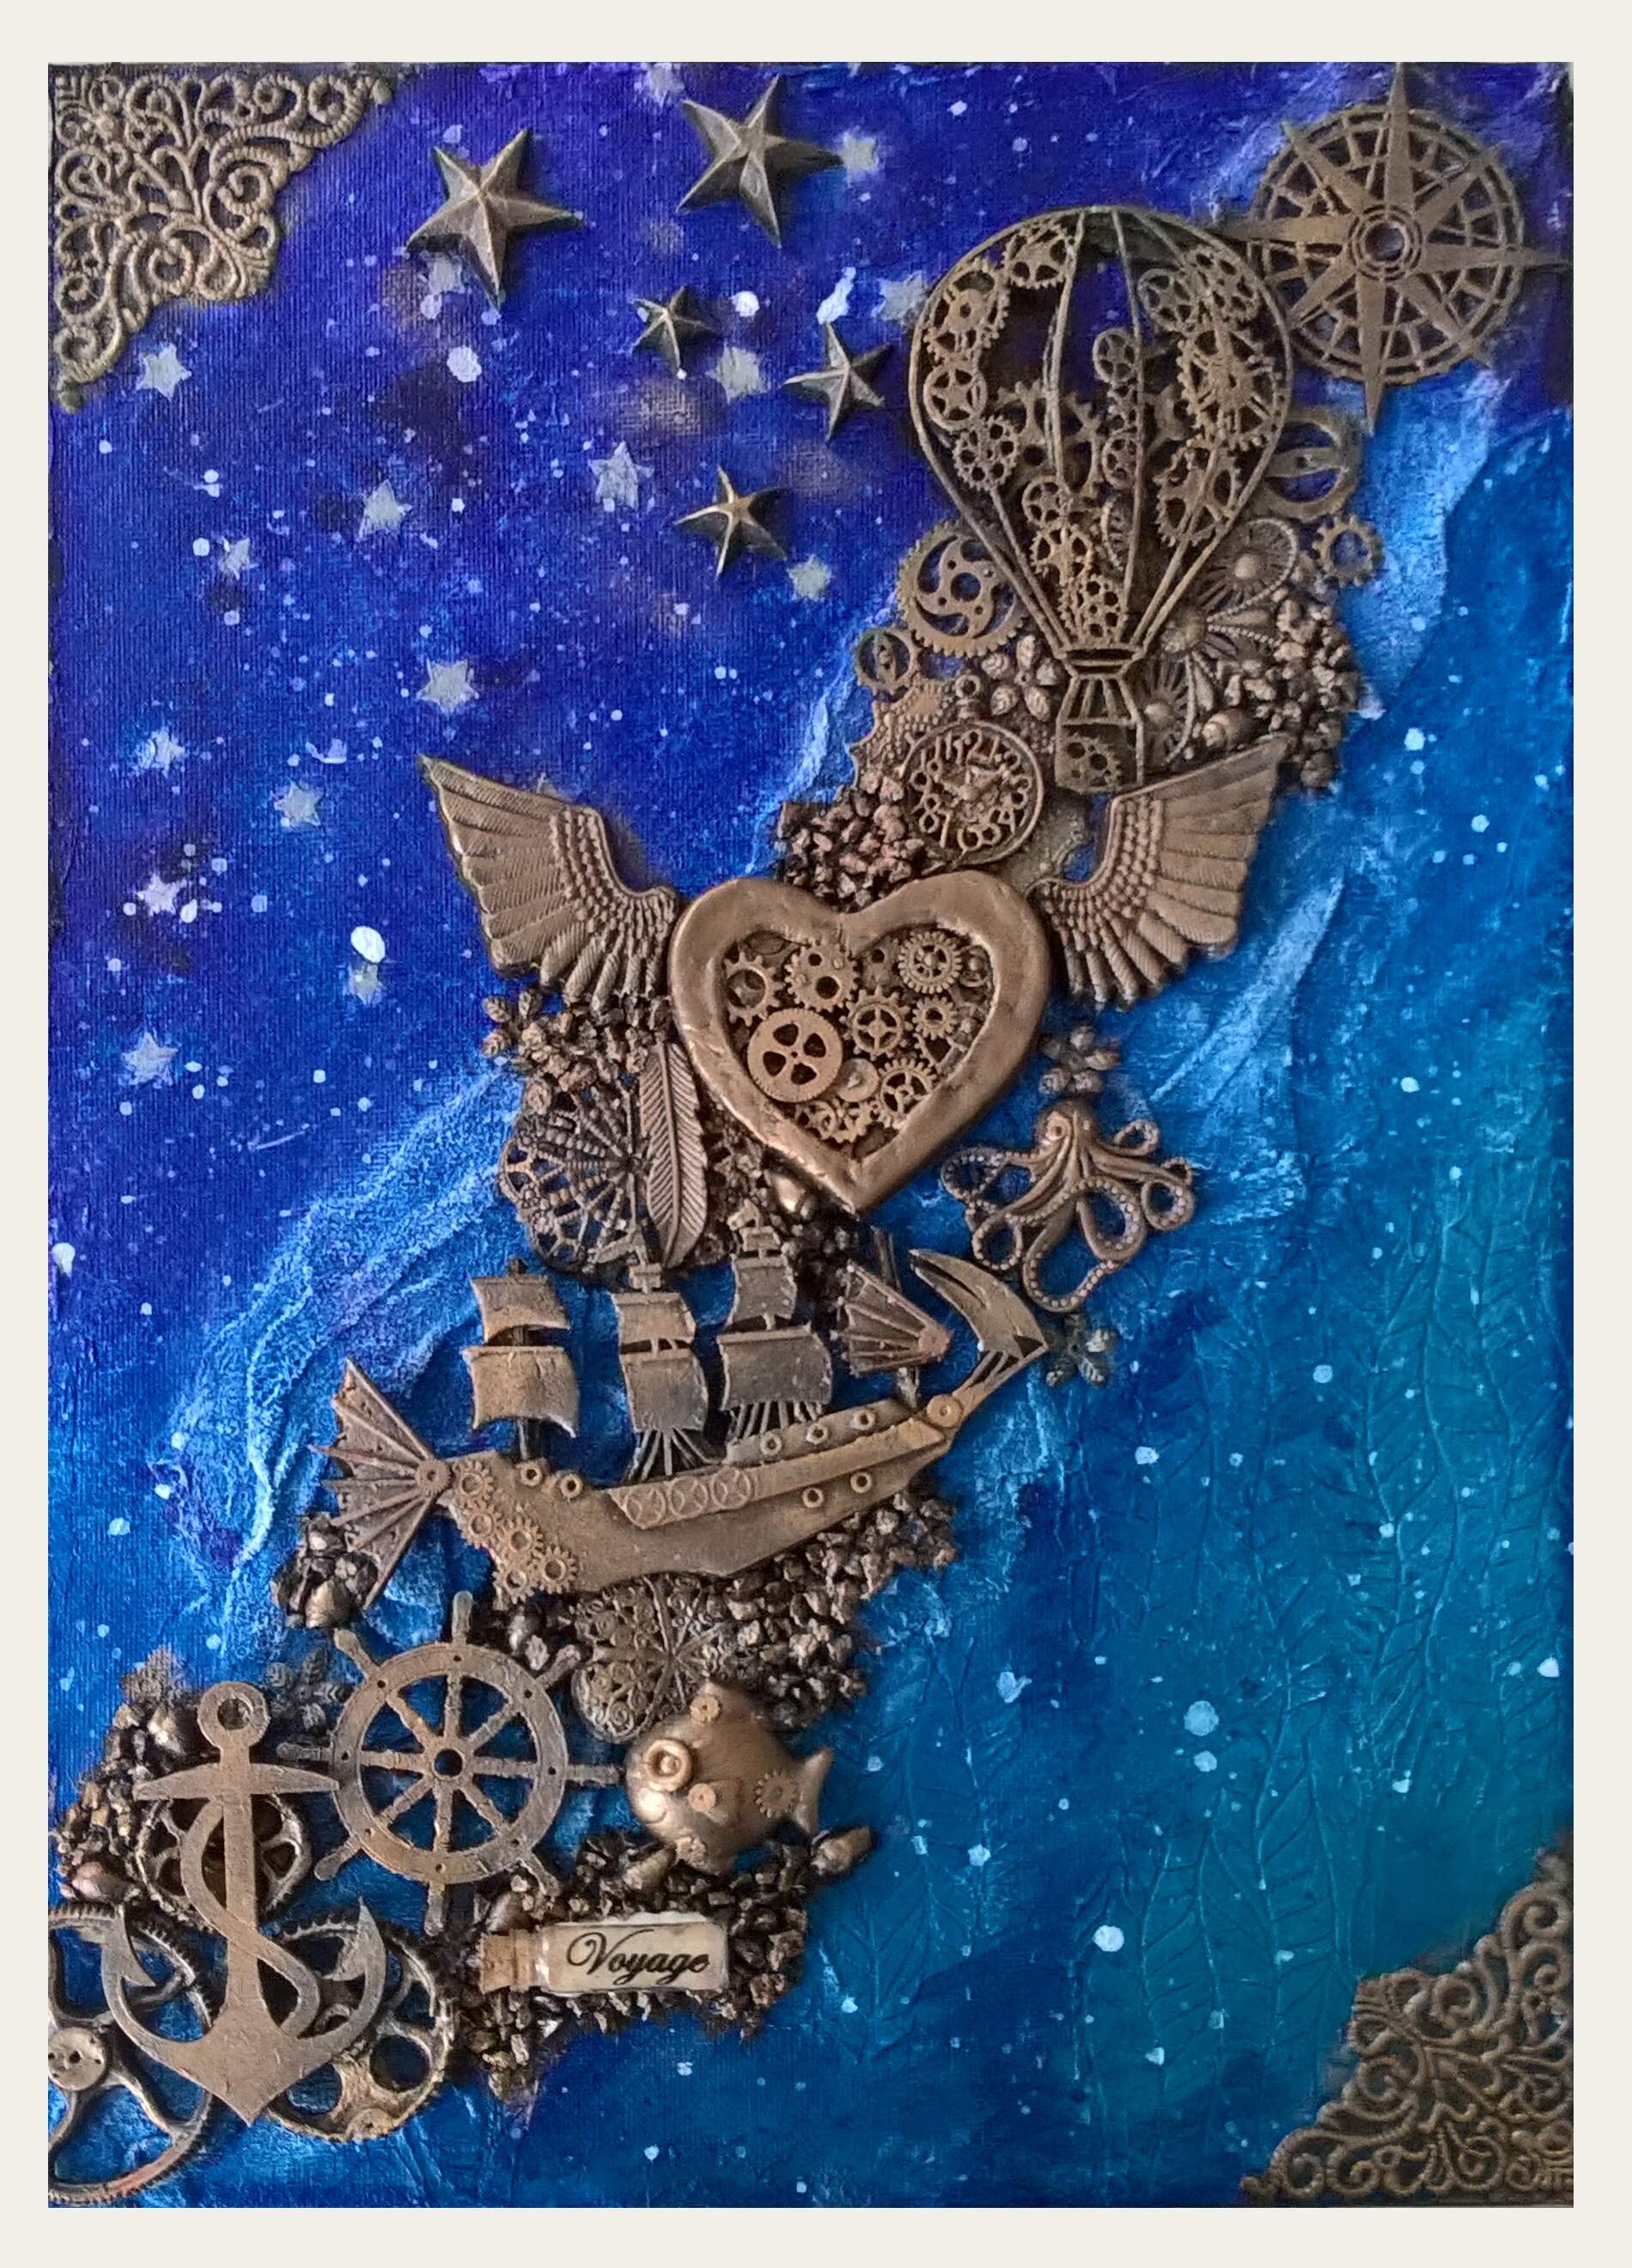 Mixed media inspired by Christy Moore's "The Voyage", with a steampunk twist, 35cm x 30cm